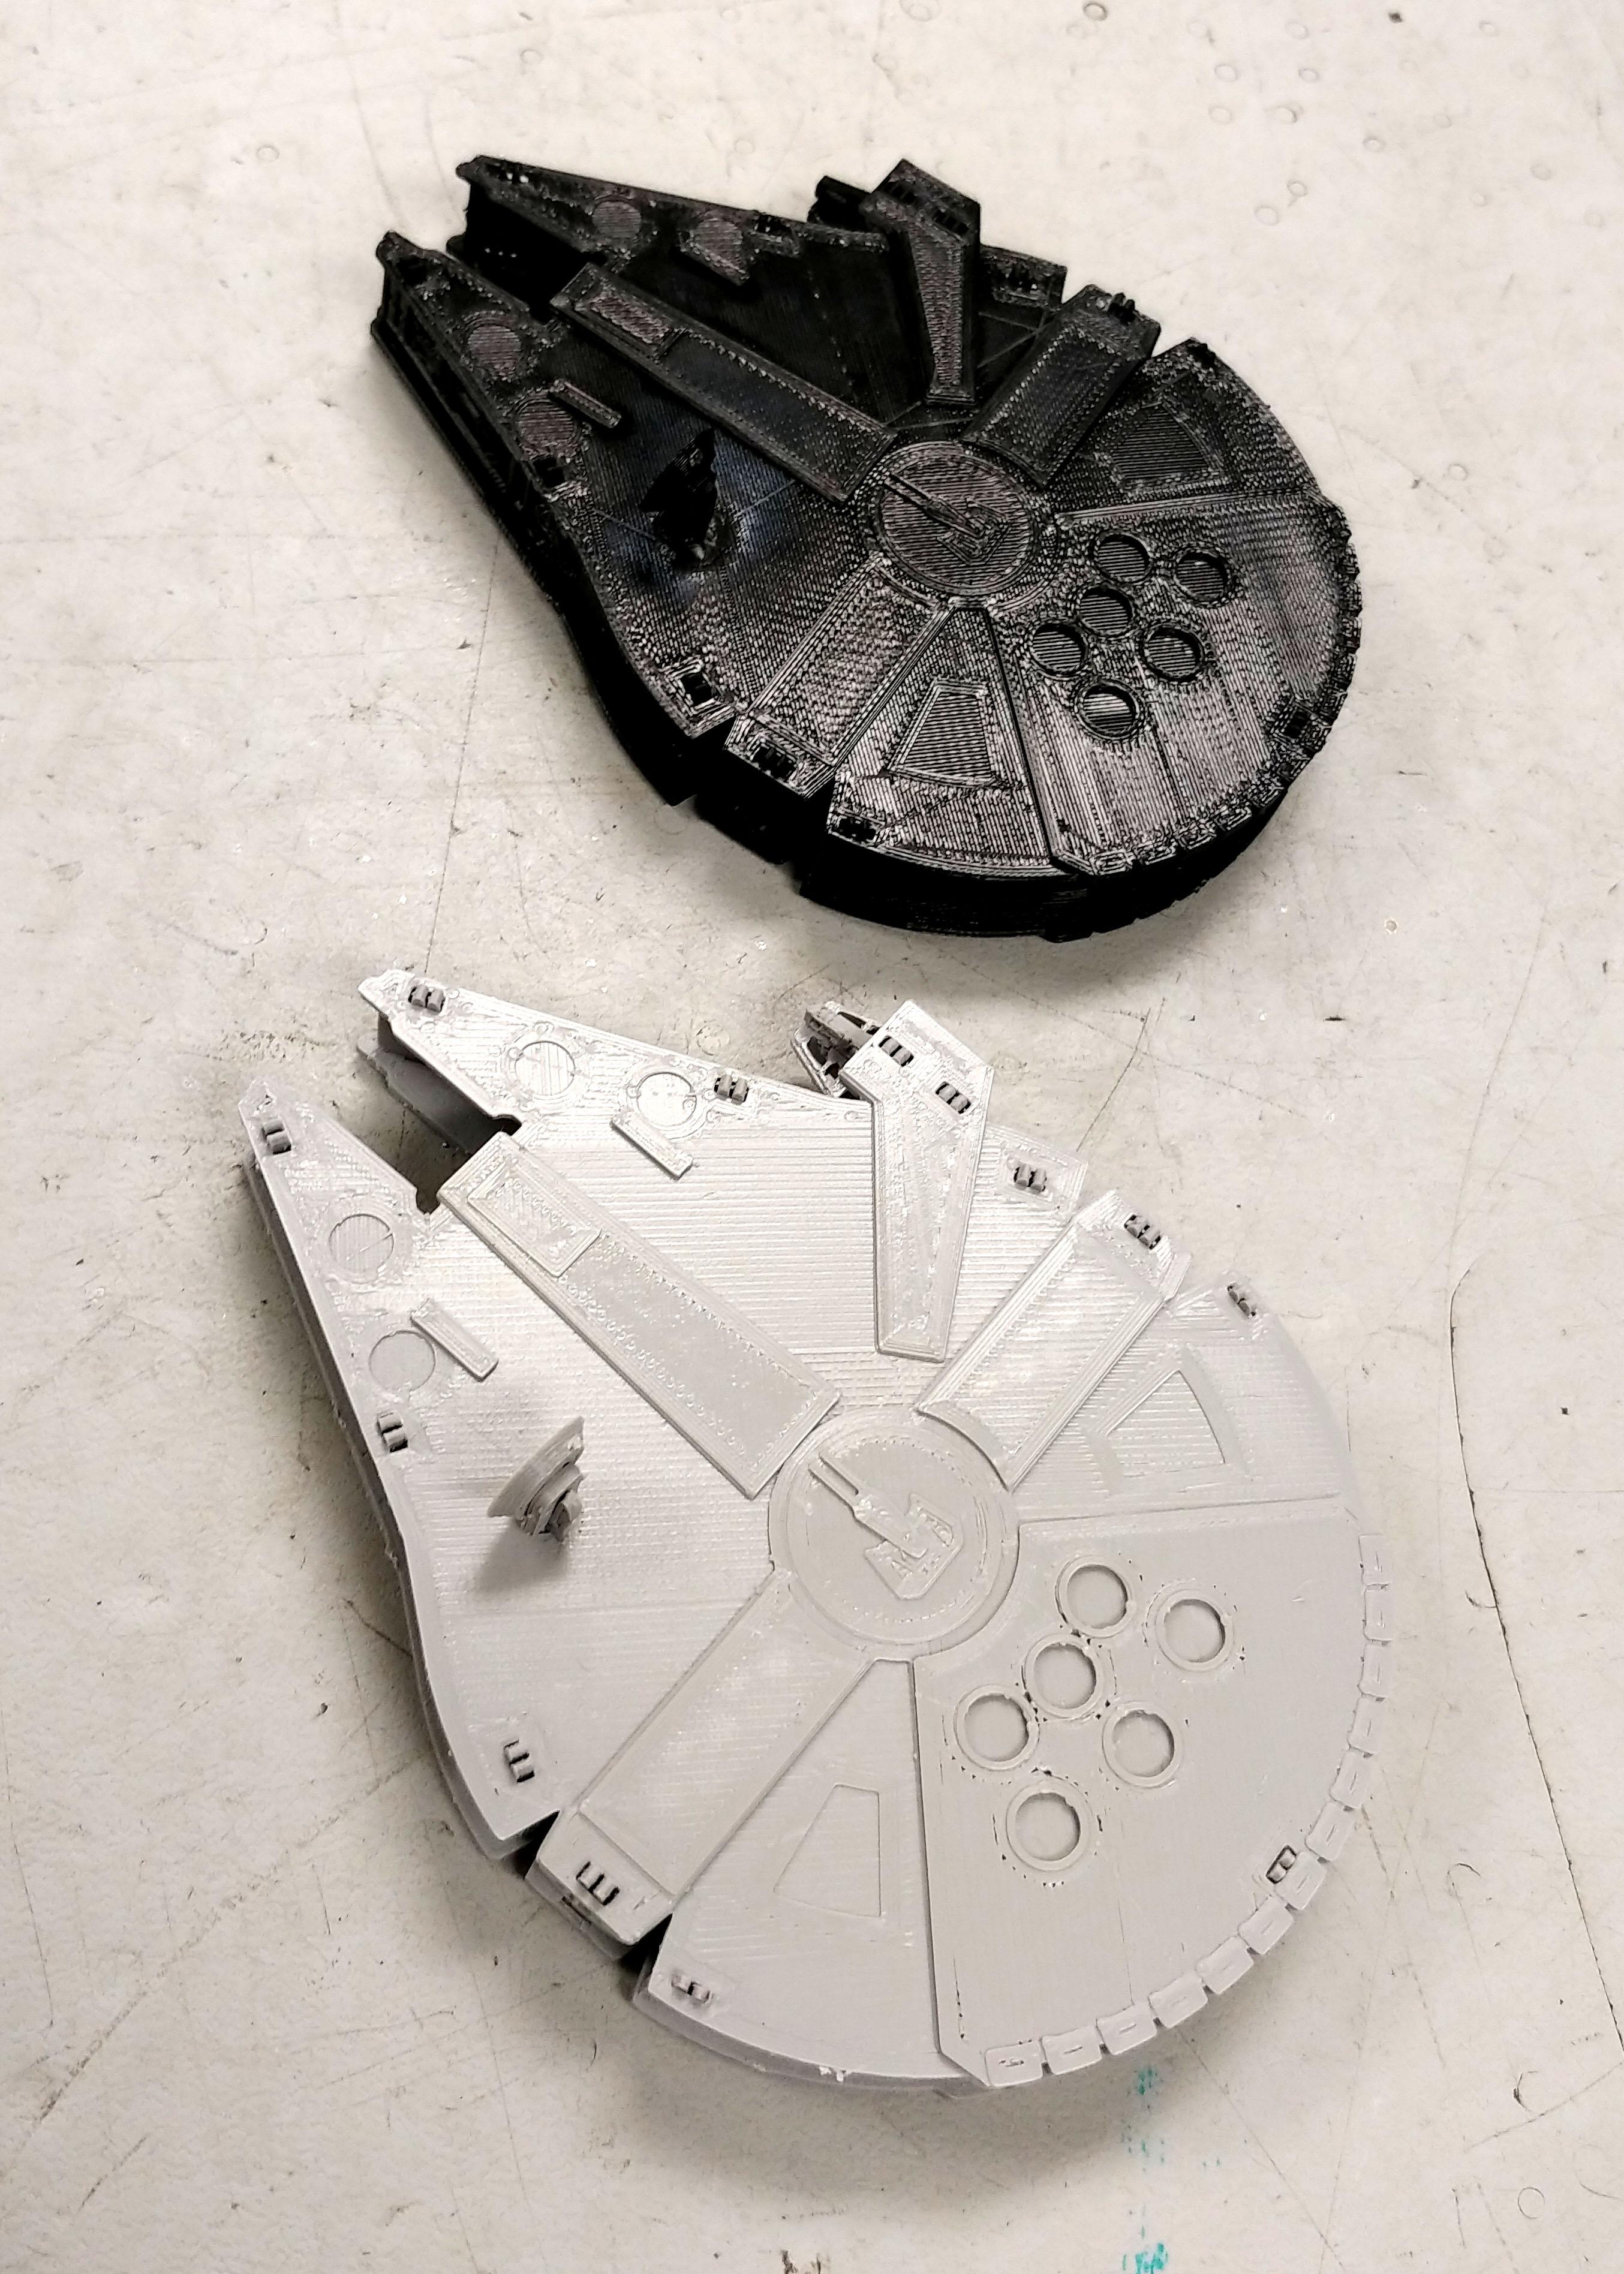 Millennium Falcon Kit Card by Fixumdude - Black and Gray PLA - 3d model